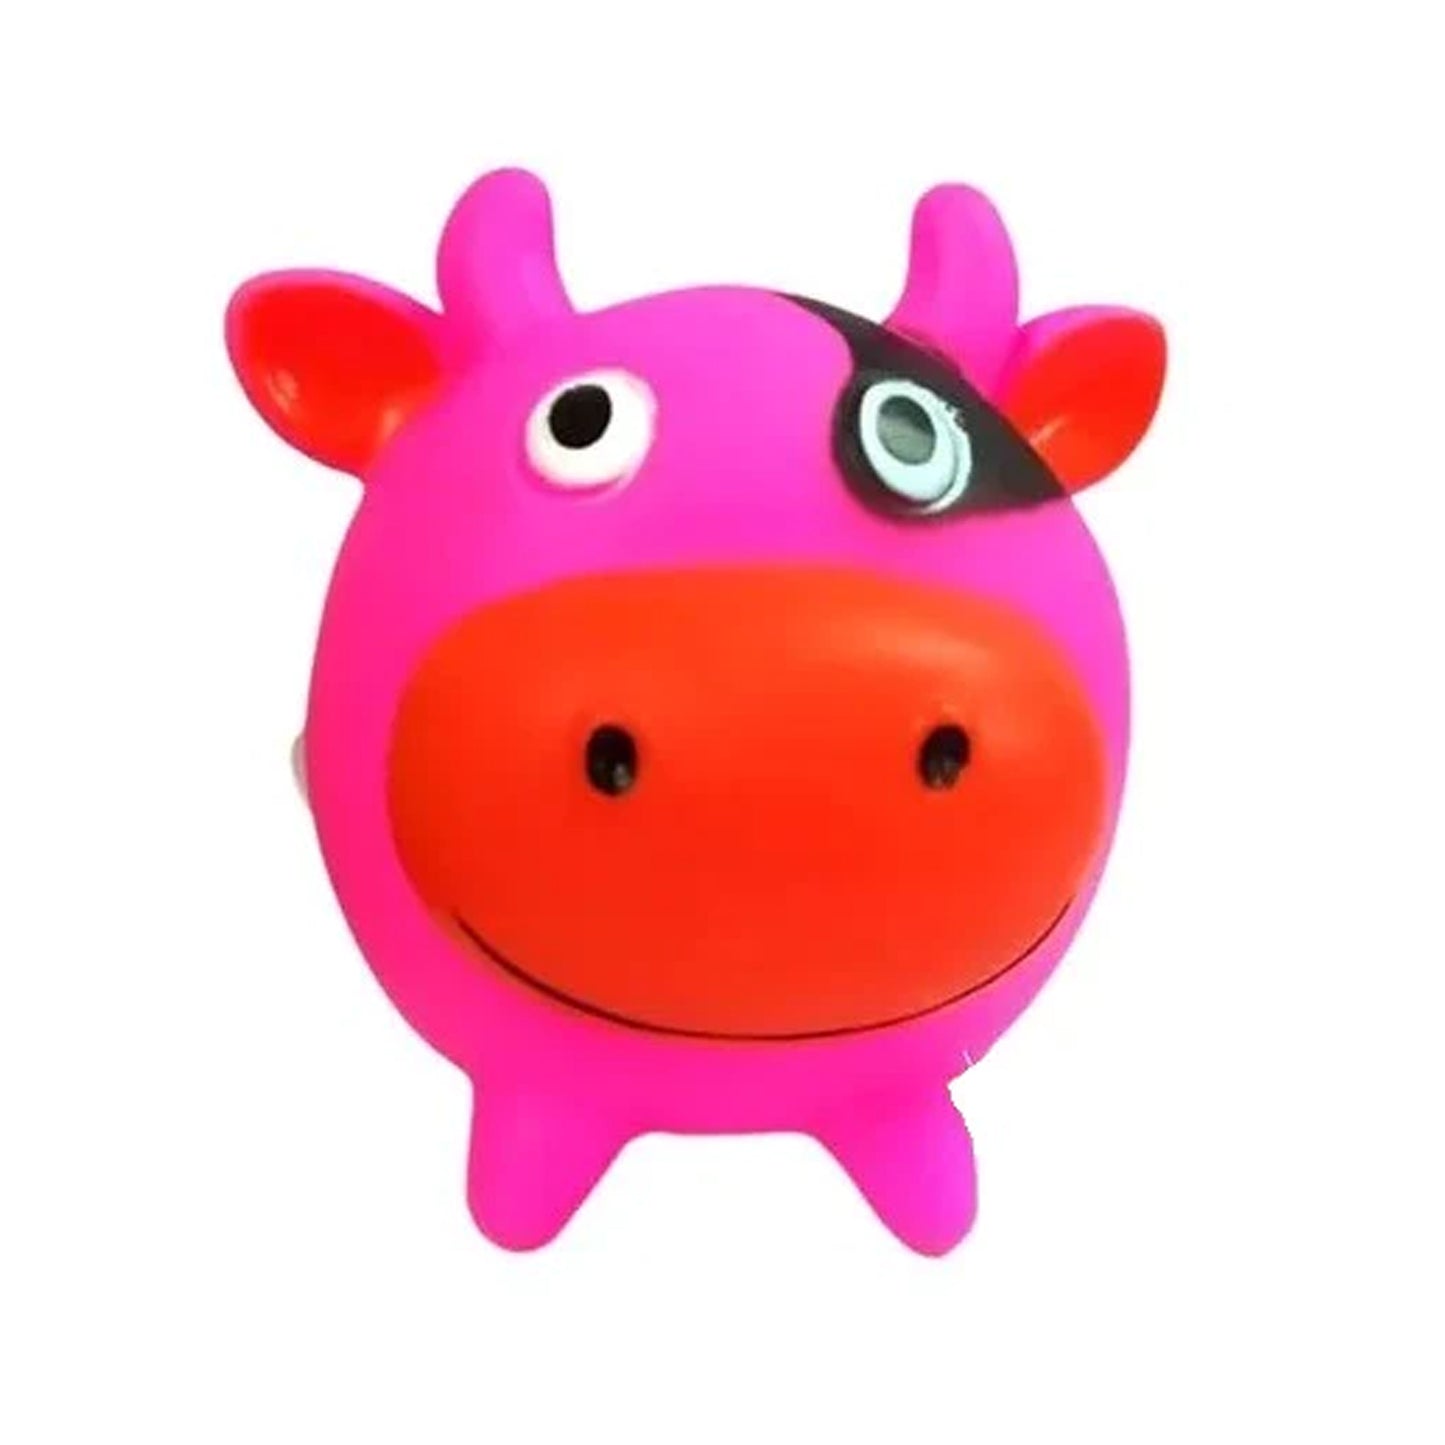 Nunbell Natural Rubber Squeaky Vinyl Cow Face Toy (Color May Vary)